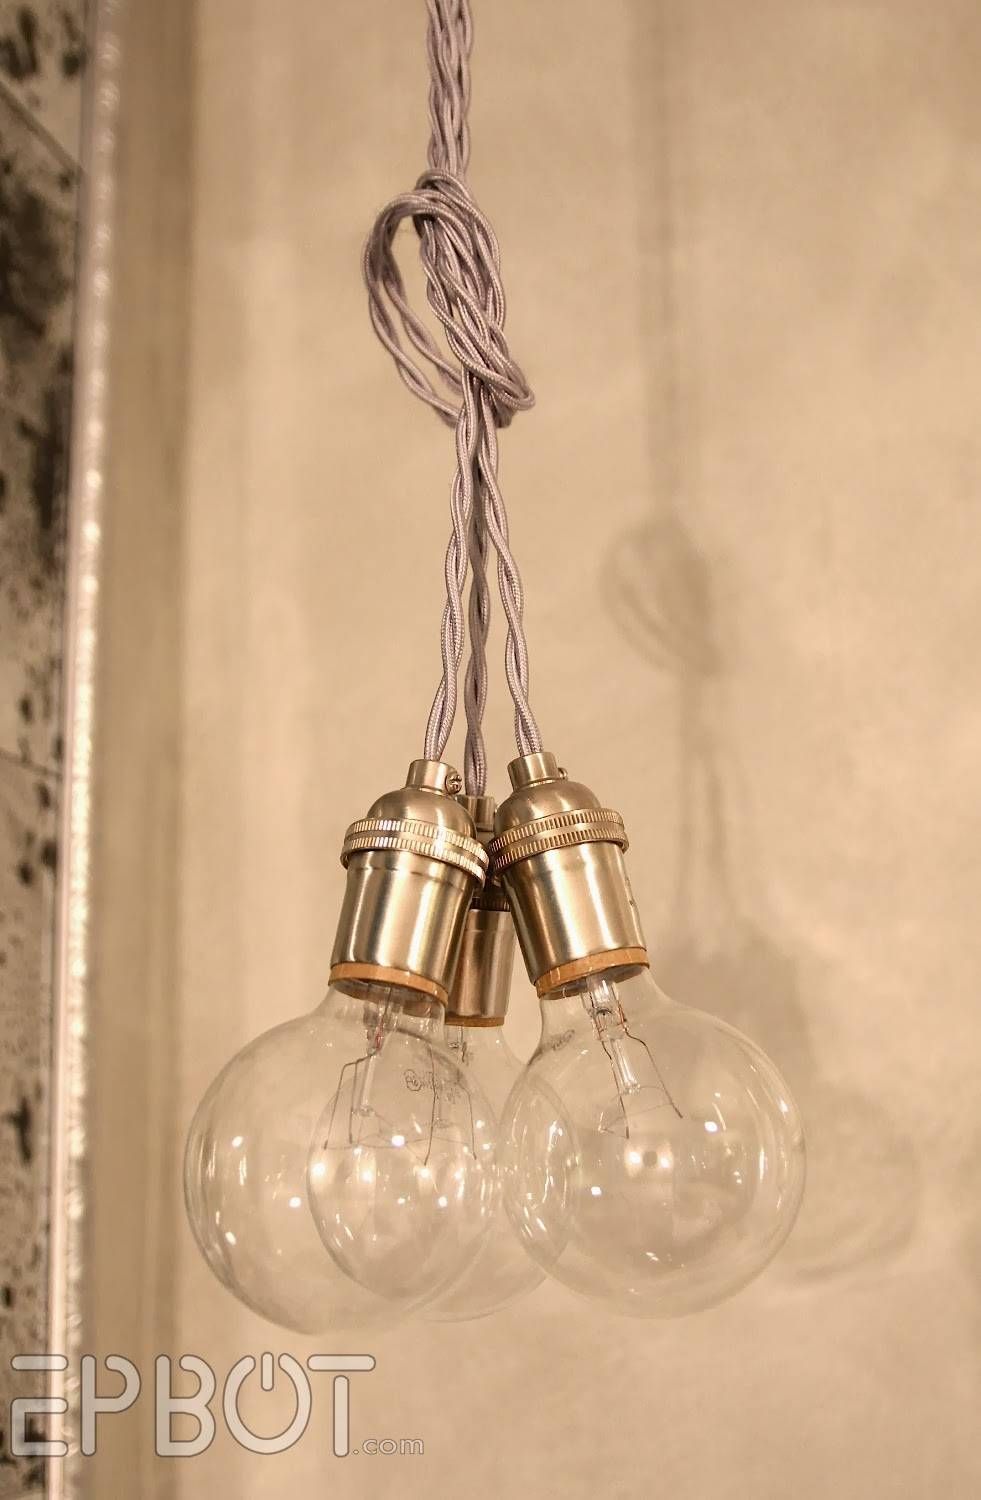 Epbot: Wire Your Own Pendant Lighting – Cheap, Easy, & Fun! Throughout Diy Pendant Lights (Photo 8 of 15)